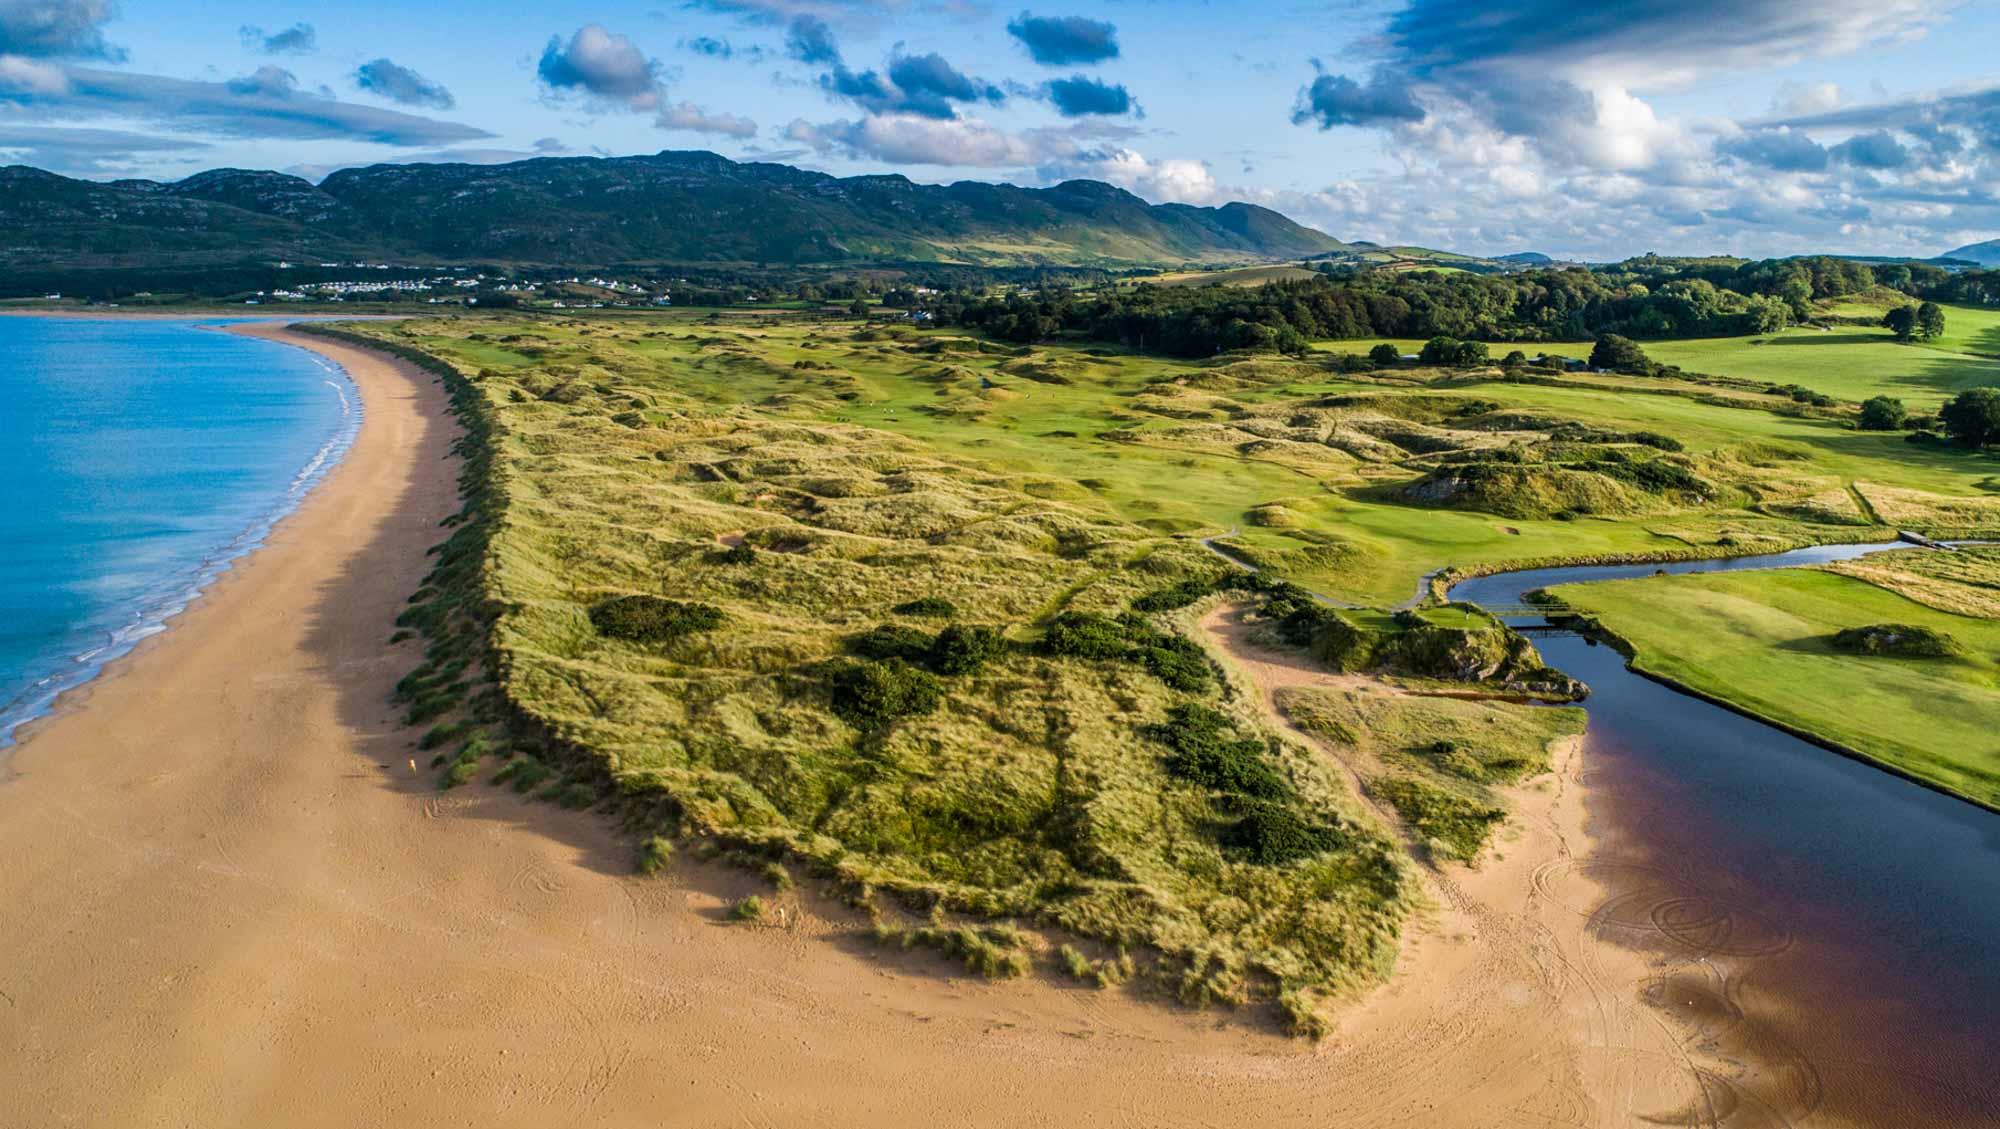 A drone photo of the headland of the links at Portsalon Golf Club in Ireland.